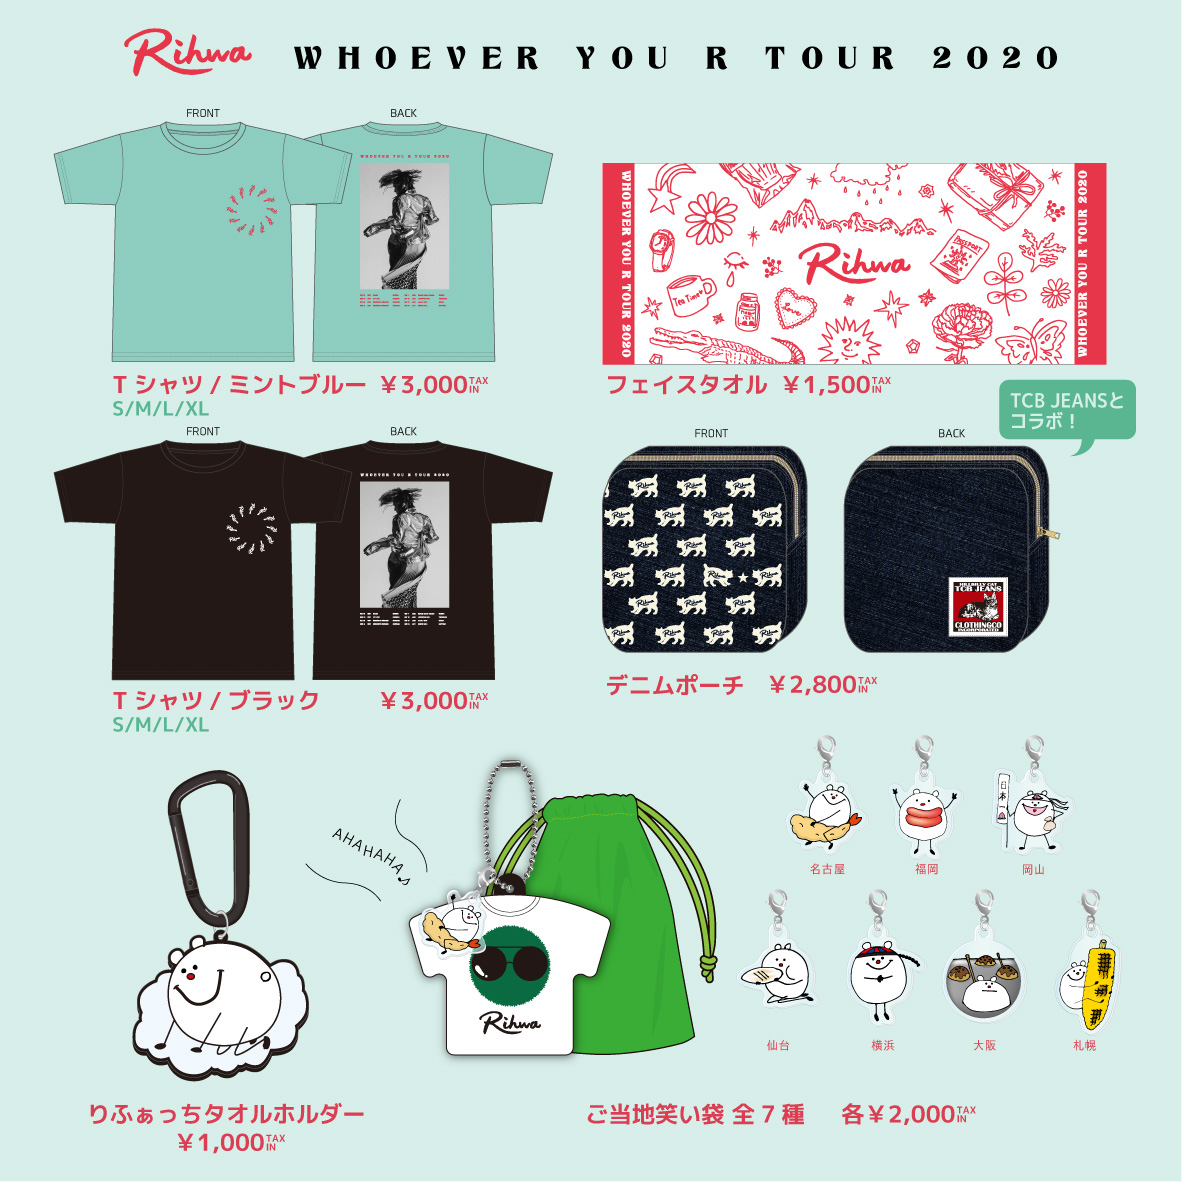 "WHOEVER YOU R" TOUR 2020グッズ